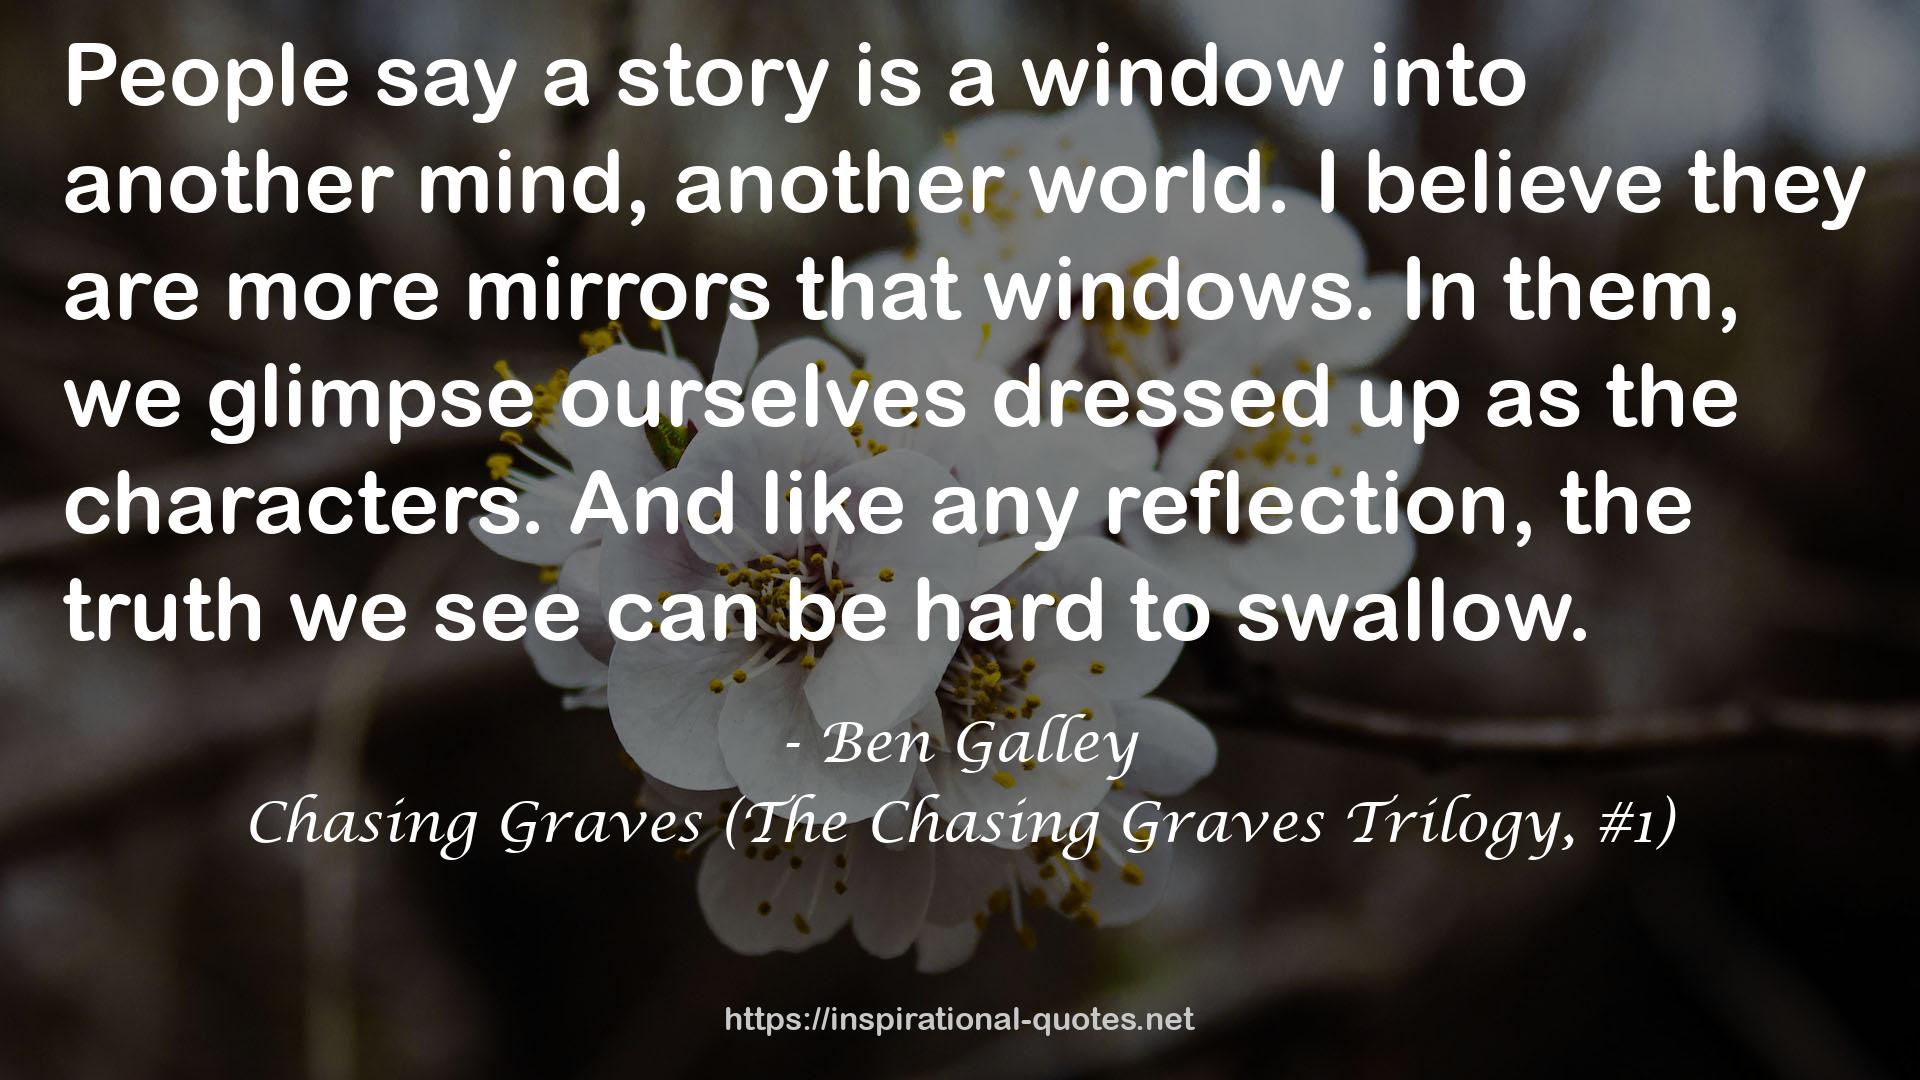 Chasing Graves (The Chasing Graves Trilogy, #1) QUOTES